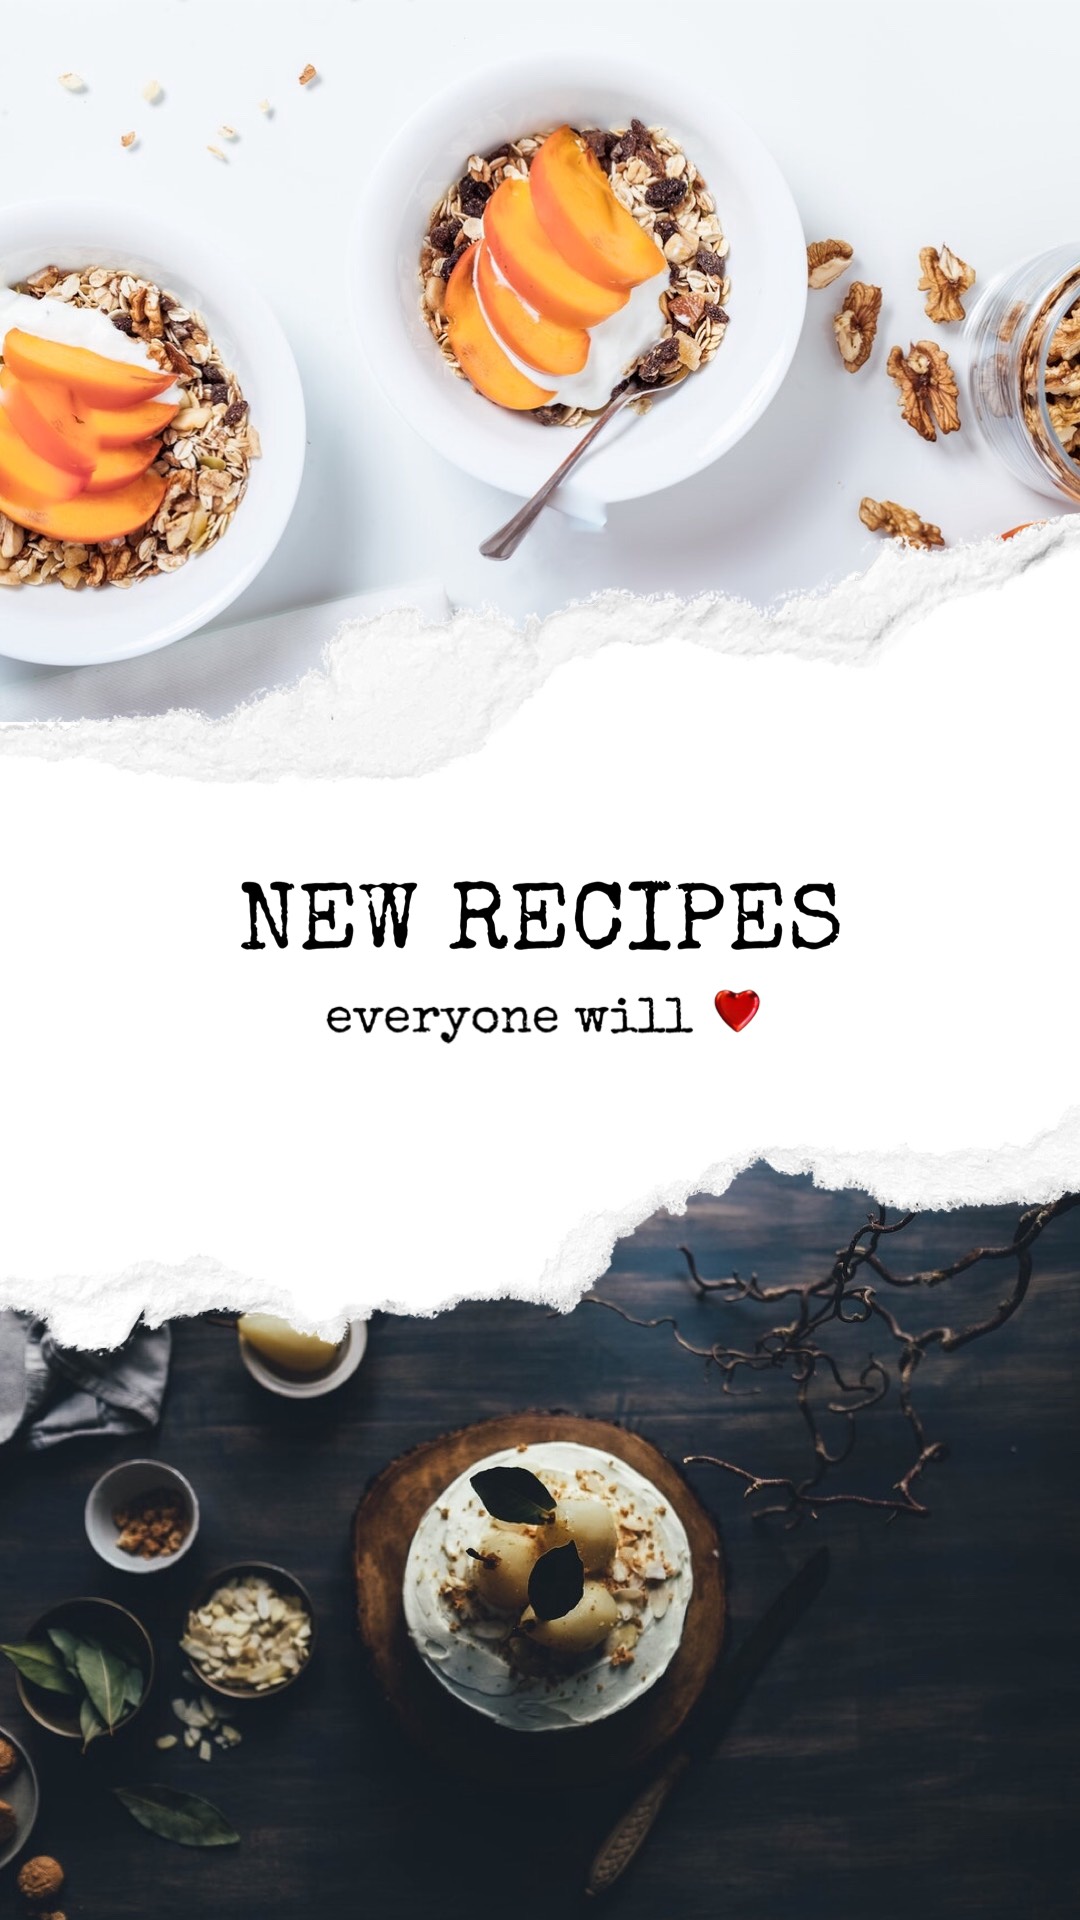 New Recipes Everyone Will Love. Bowls Of Food And A Plate Of Fruit Template